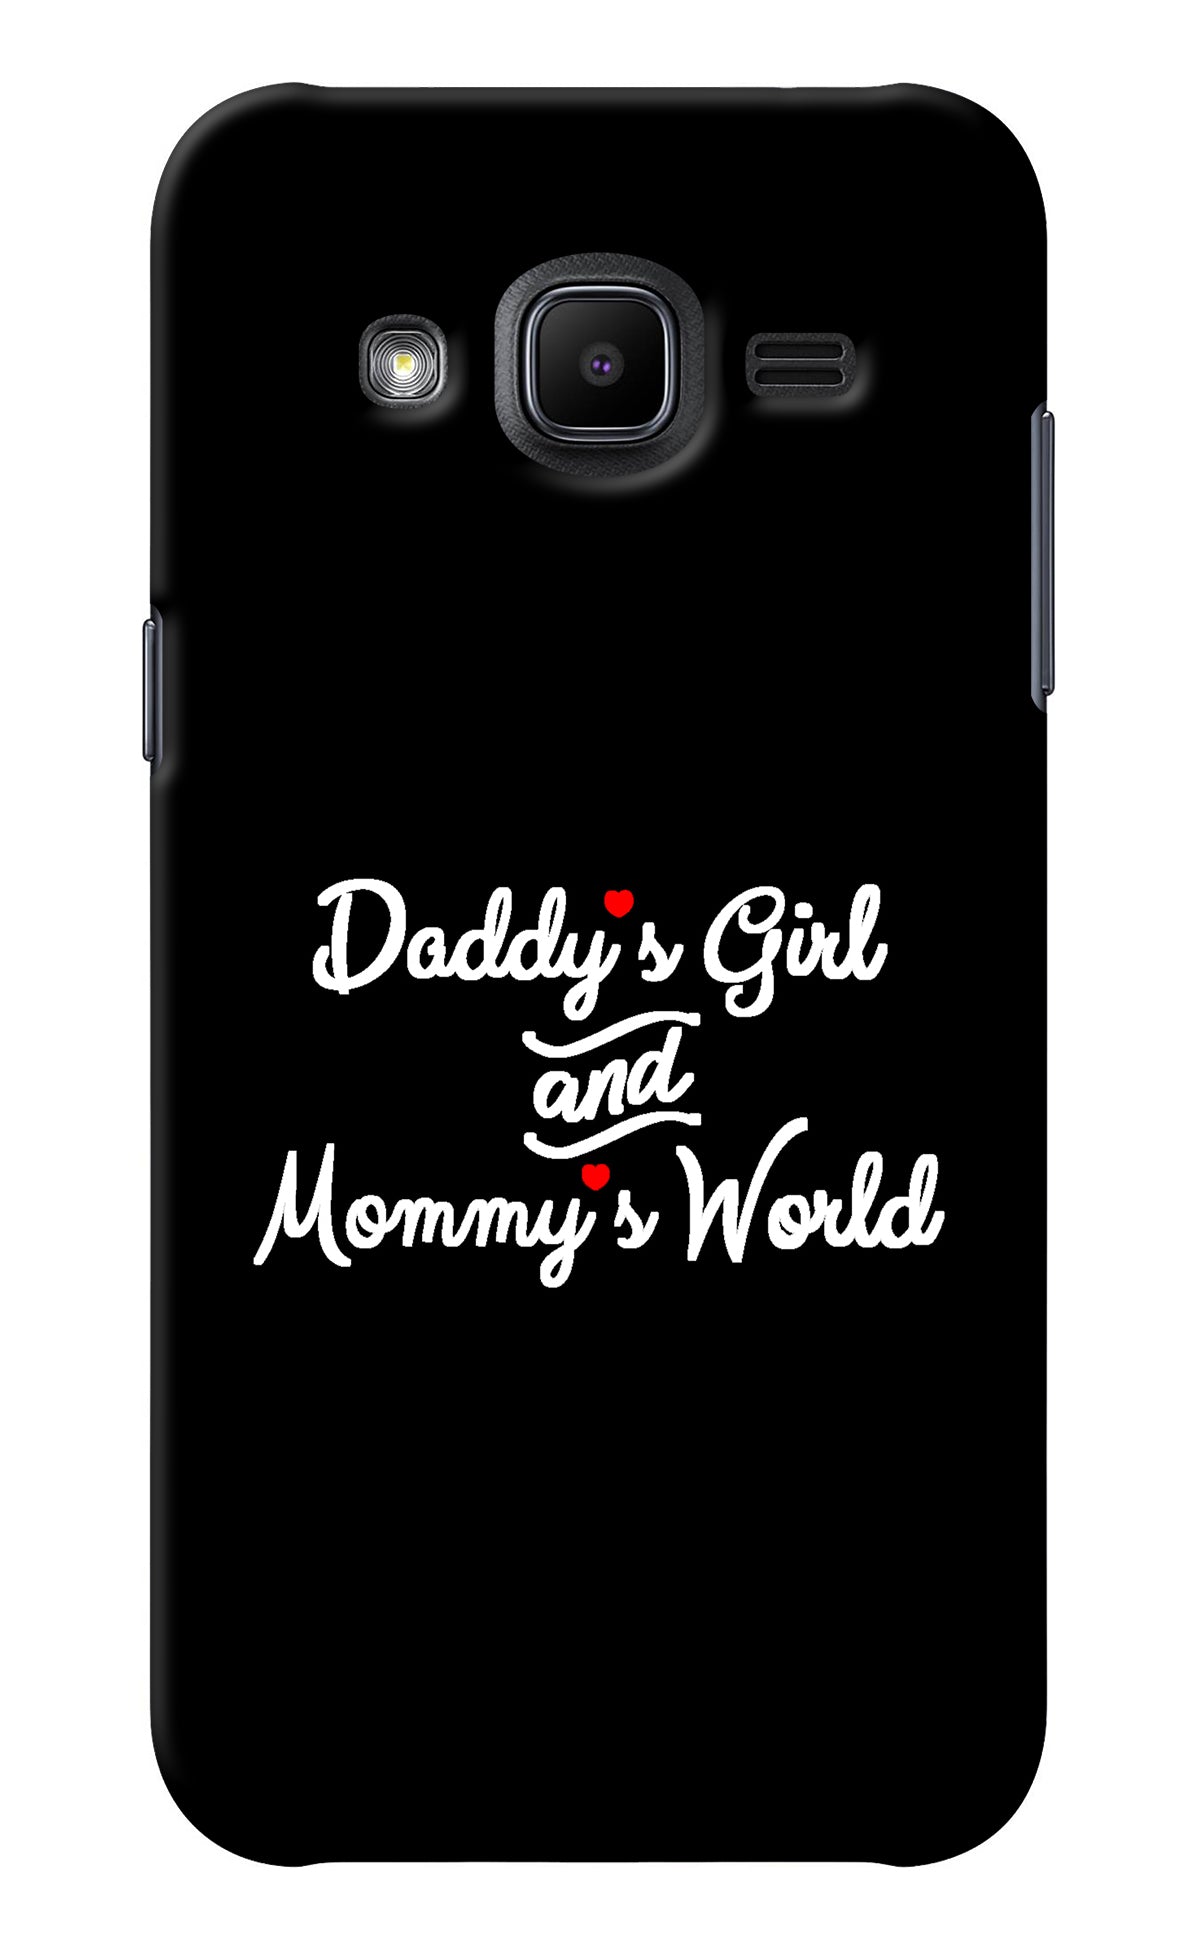 Daddy's Girl and Mommy's World Samsung J2 2017 Back Cover